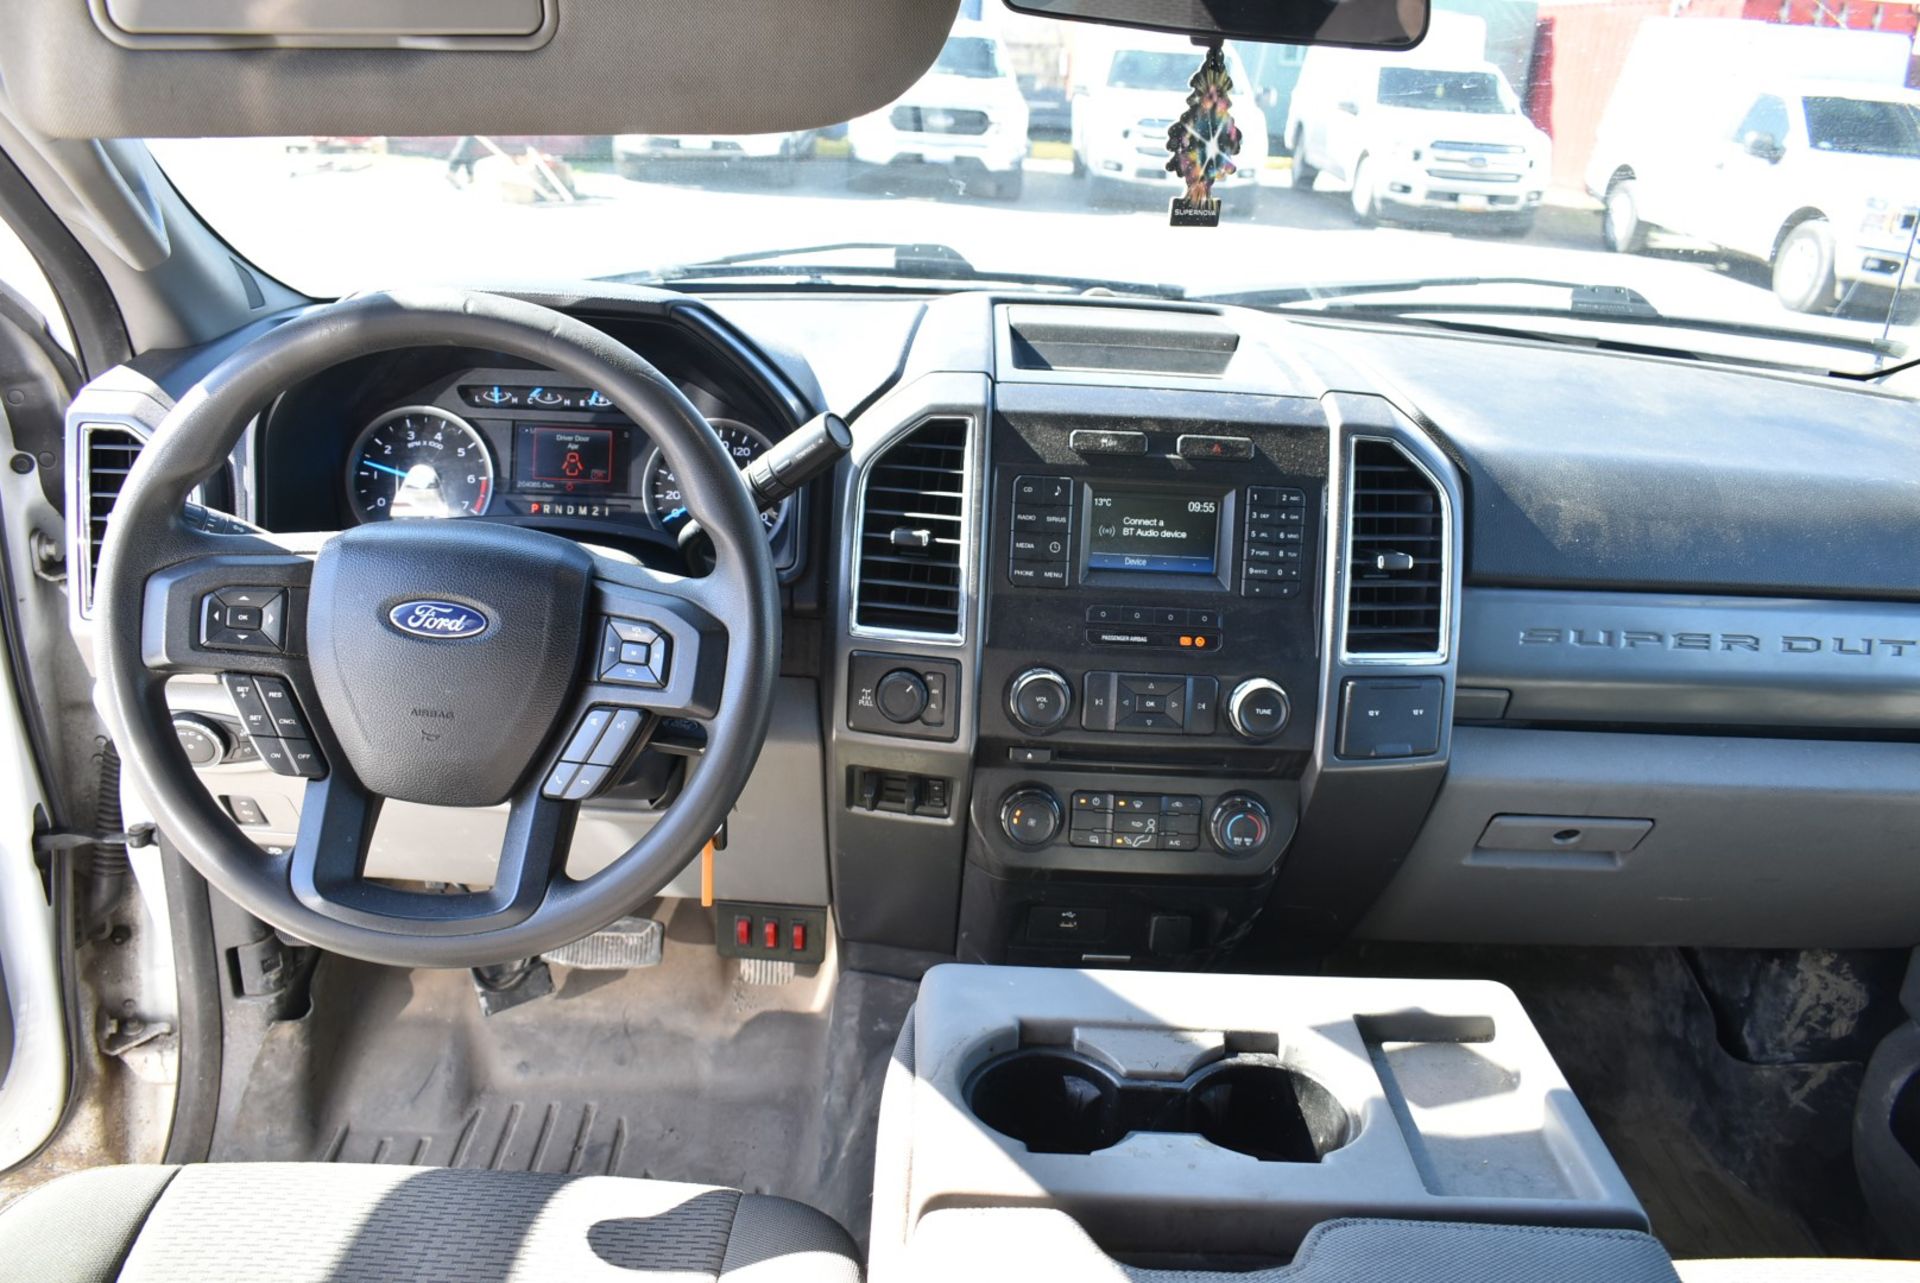 FORD (2017) F250 XLT SUPER DUTY CREW CAB PICKUP TRUCK WITH 6.2L 8 CYL. GAS ENGINE, AUTO. - Image 12 of 15